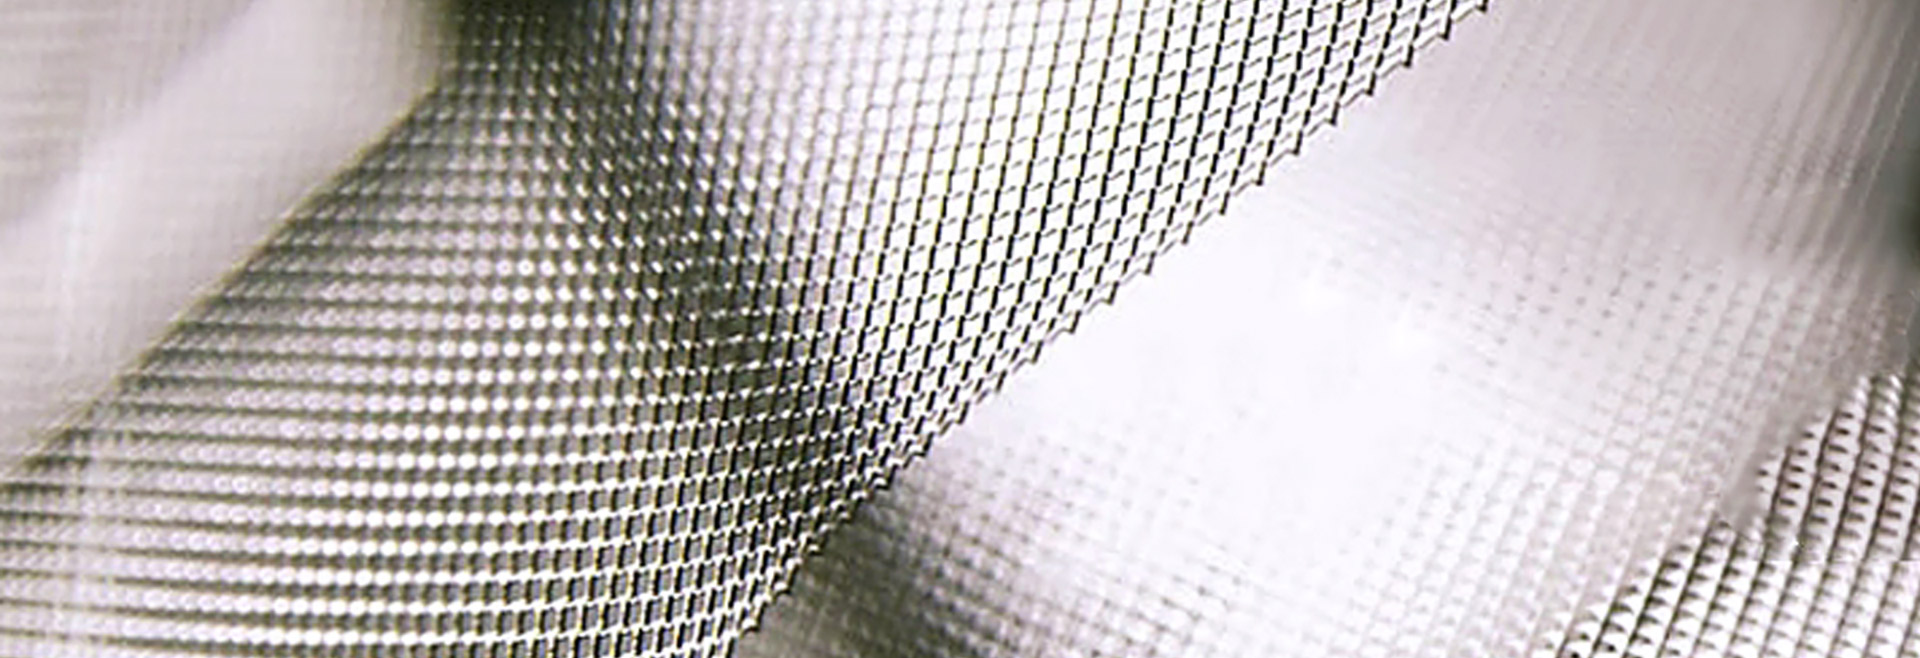 Micro Expanded Metal Mesh  High Conductivity & Refraction Ability